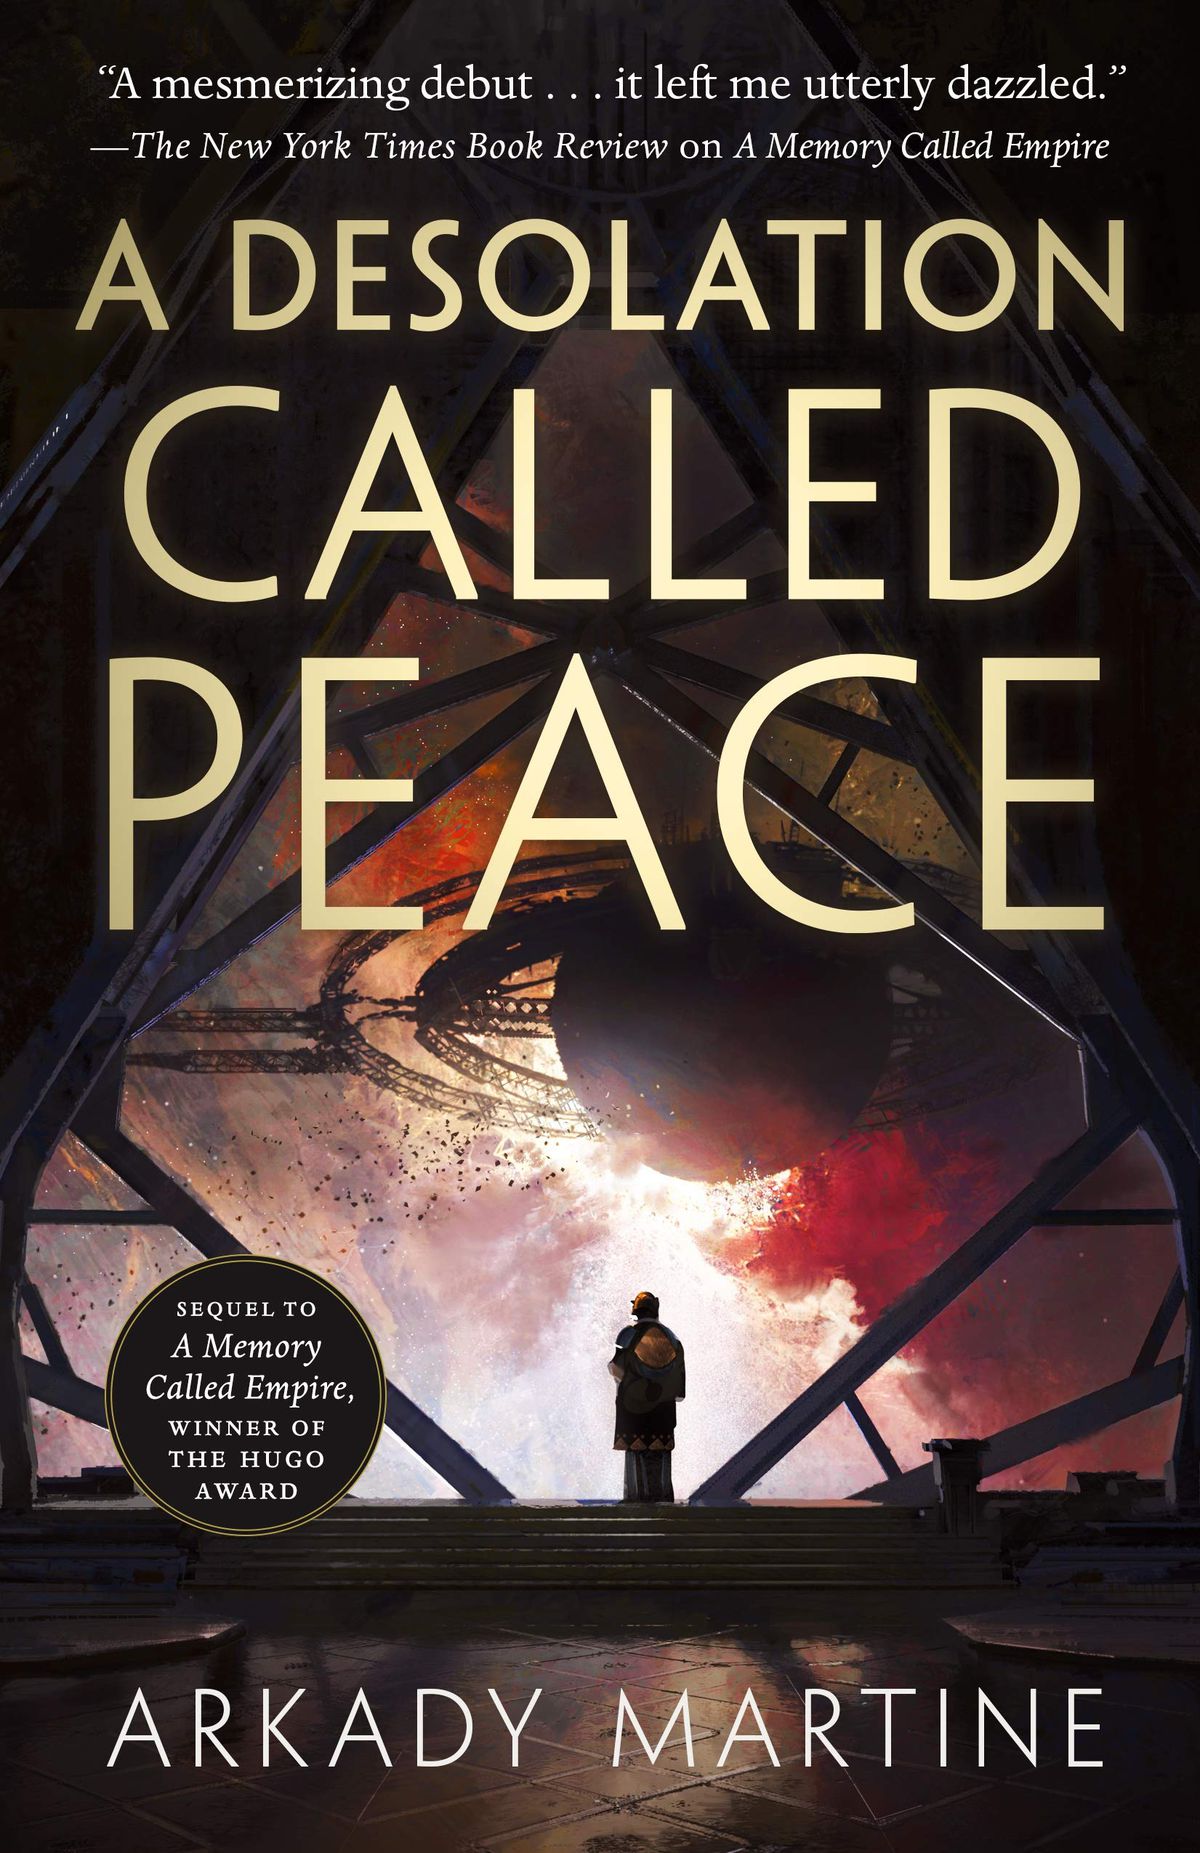 The cover for “A Desolation Called Peace” by Arkady Martine which shows a person looking out a large window at a planet in the distance